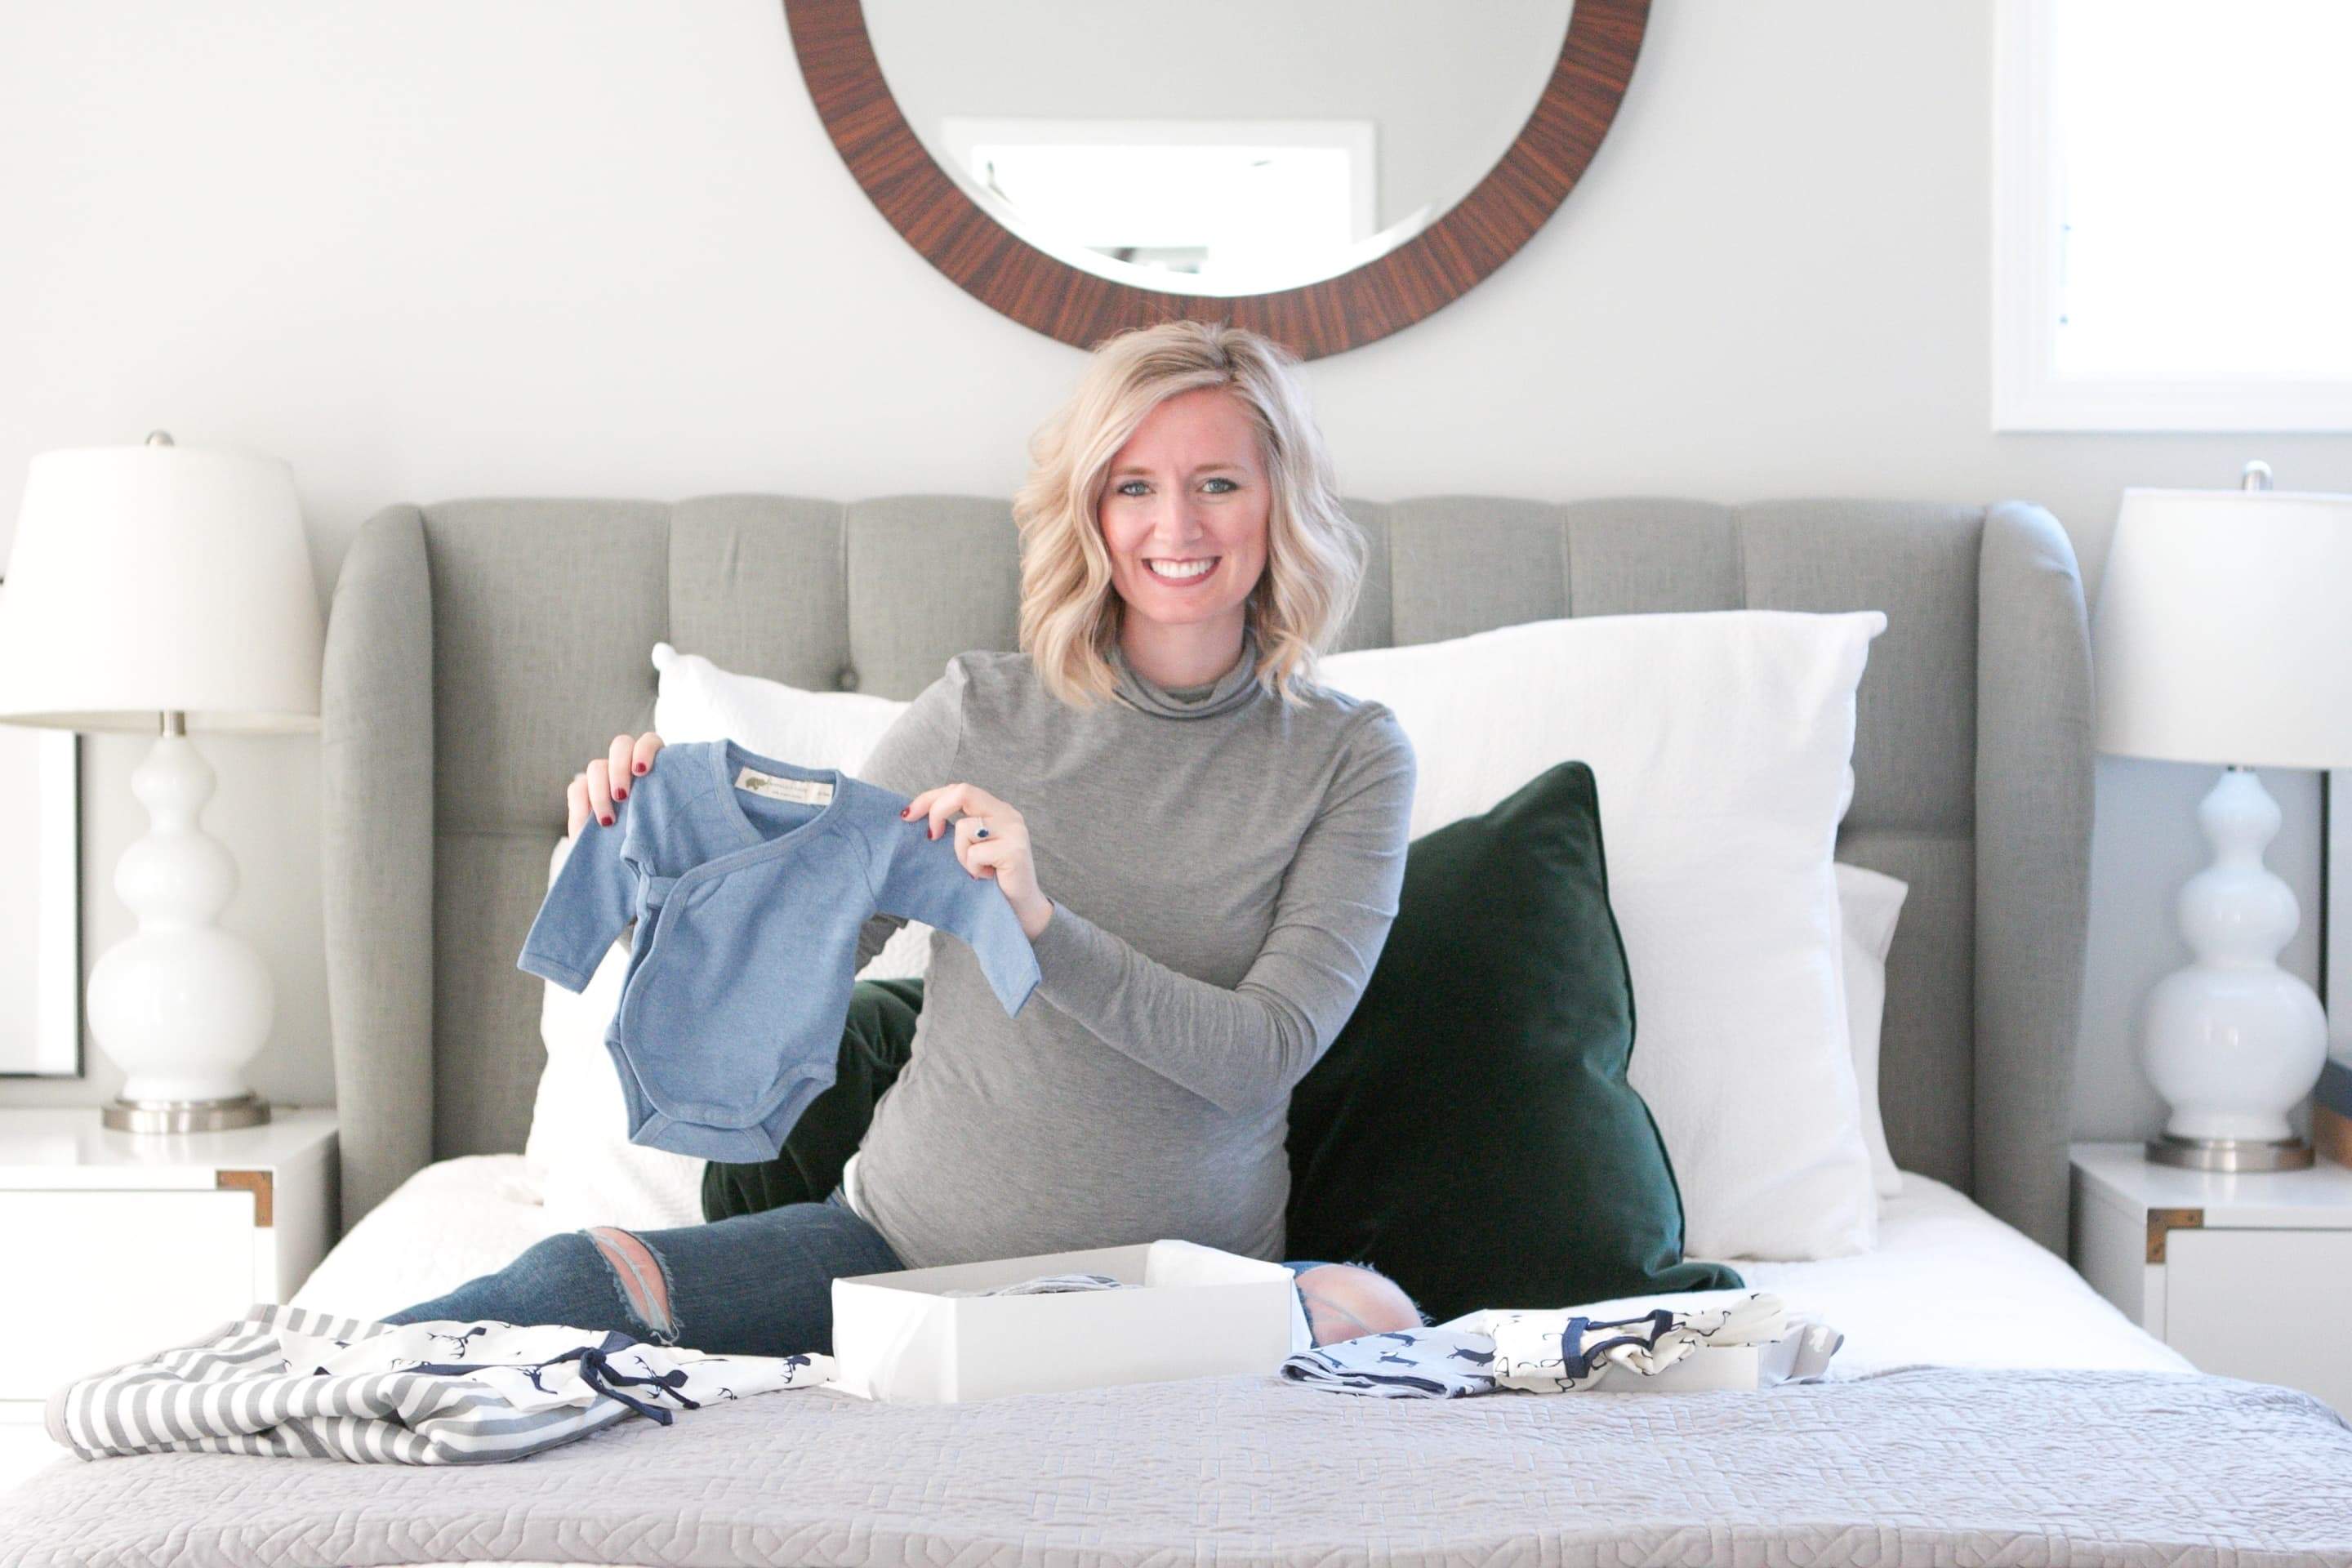 A Layette Reveal with DIY Playbook